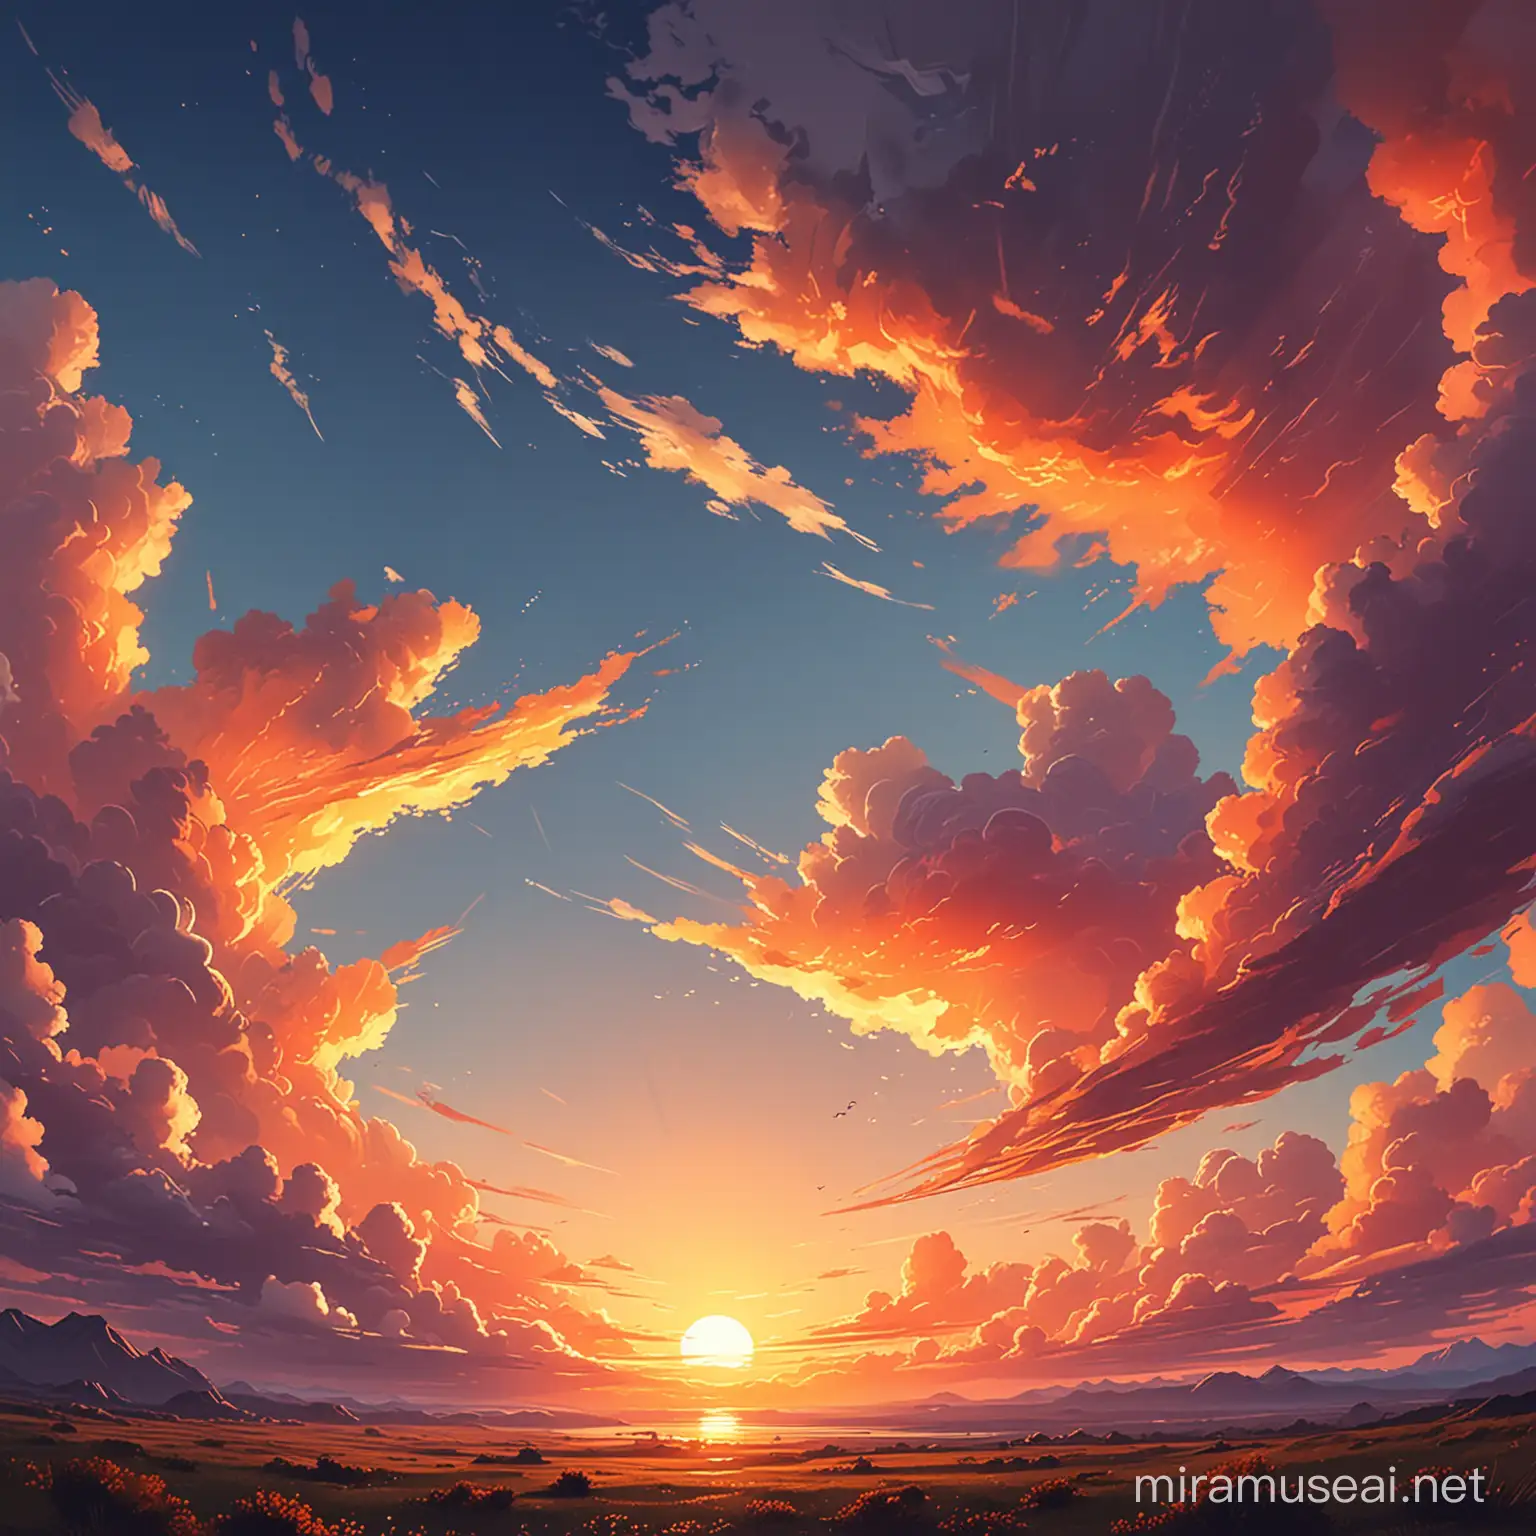 Vibrant Stylized Sky and Sunset Painting